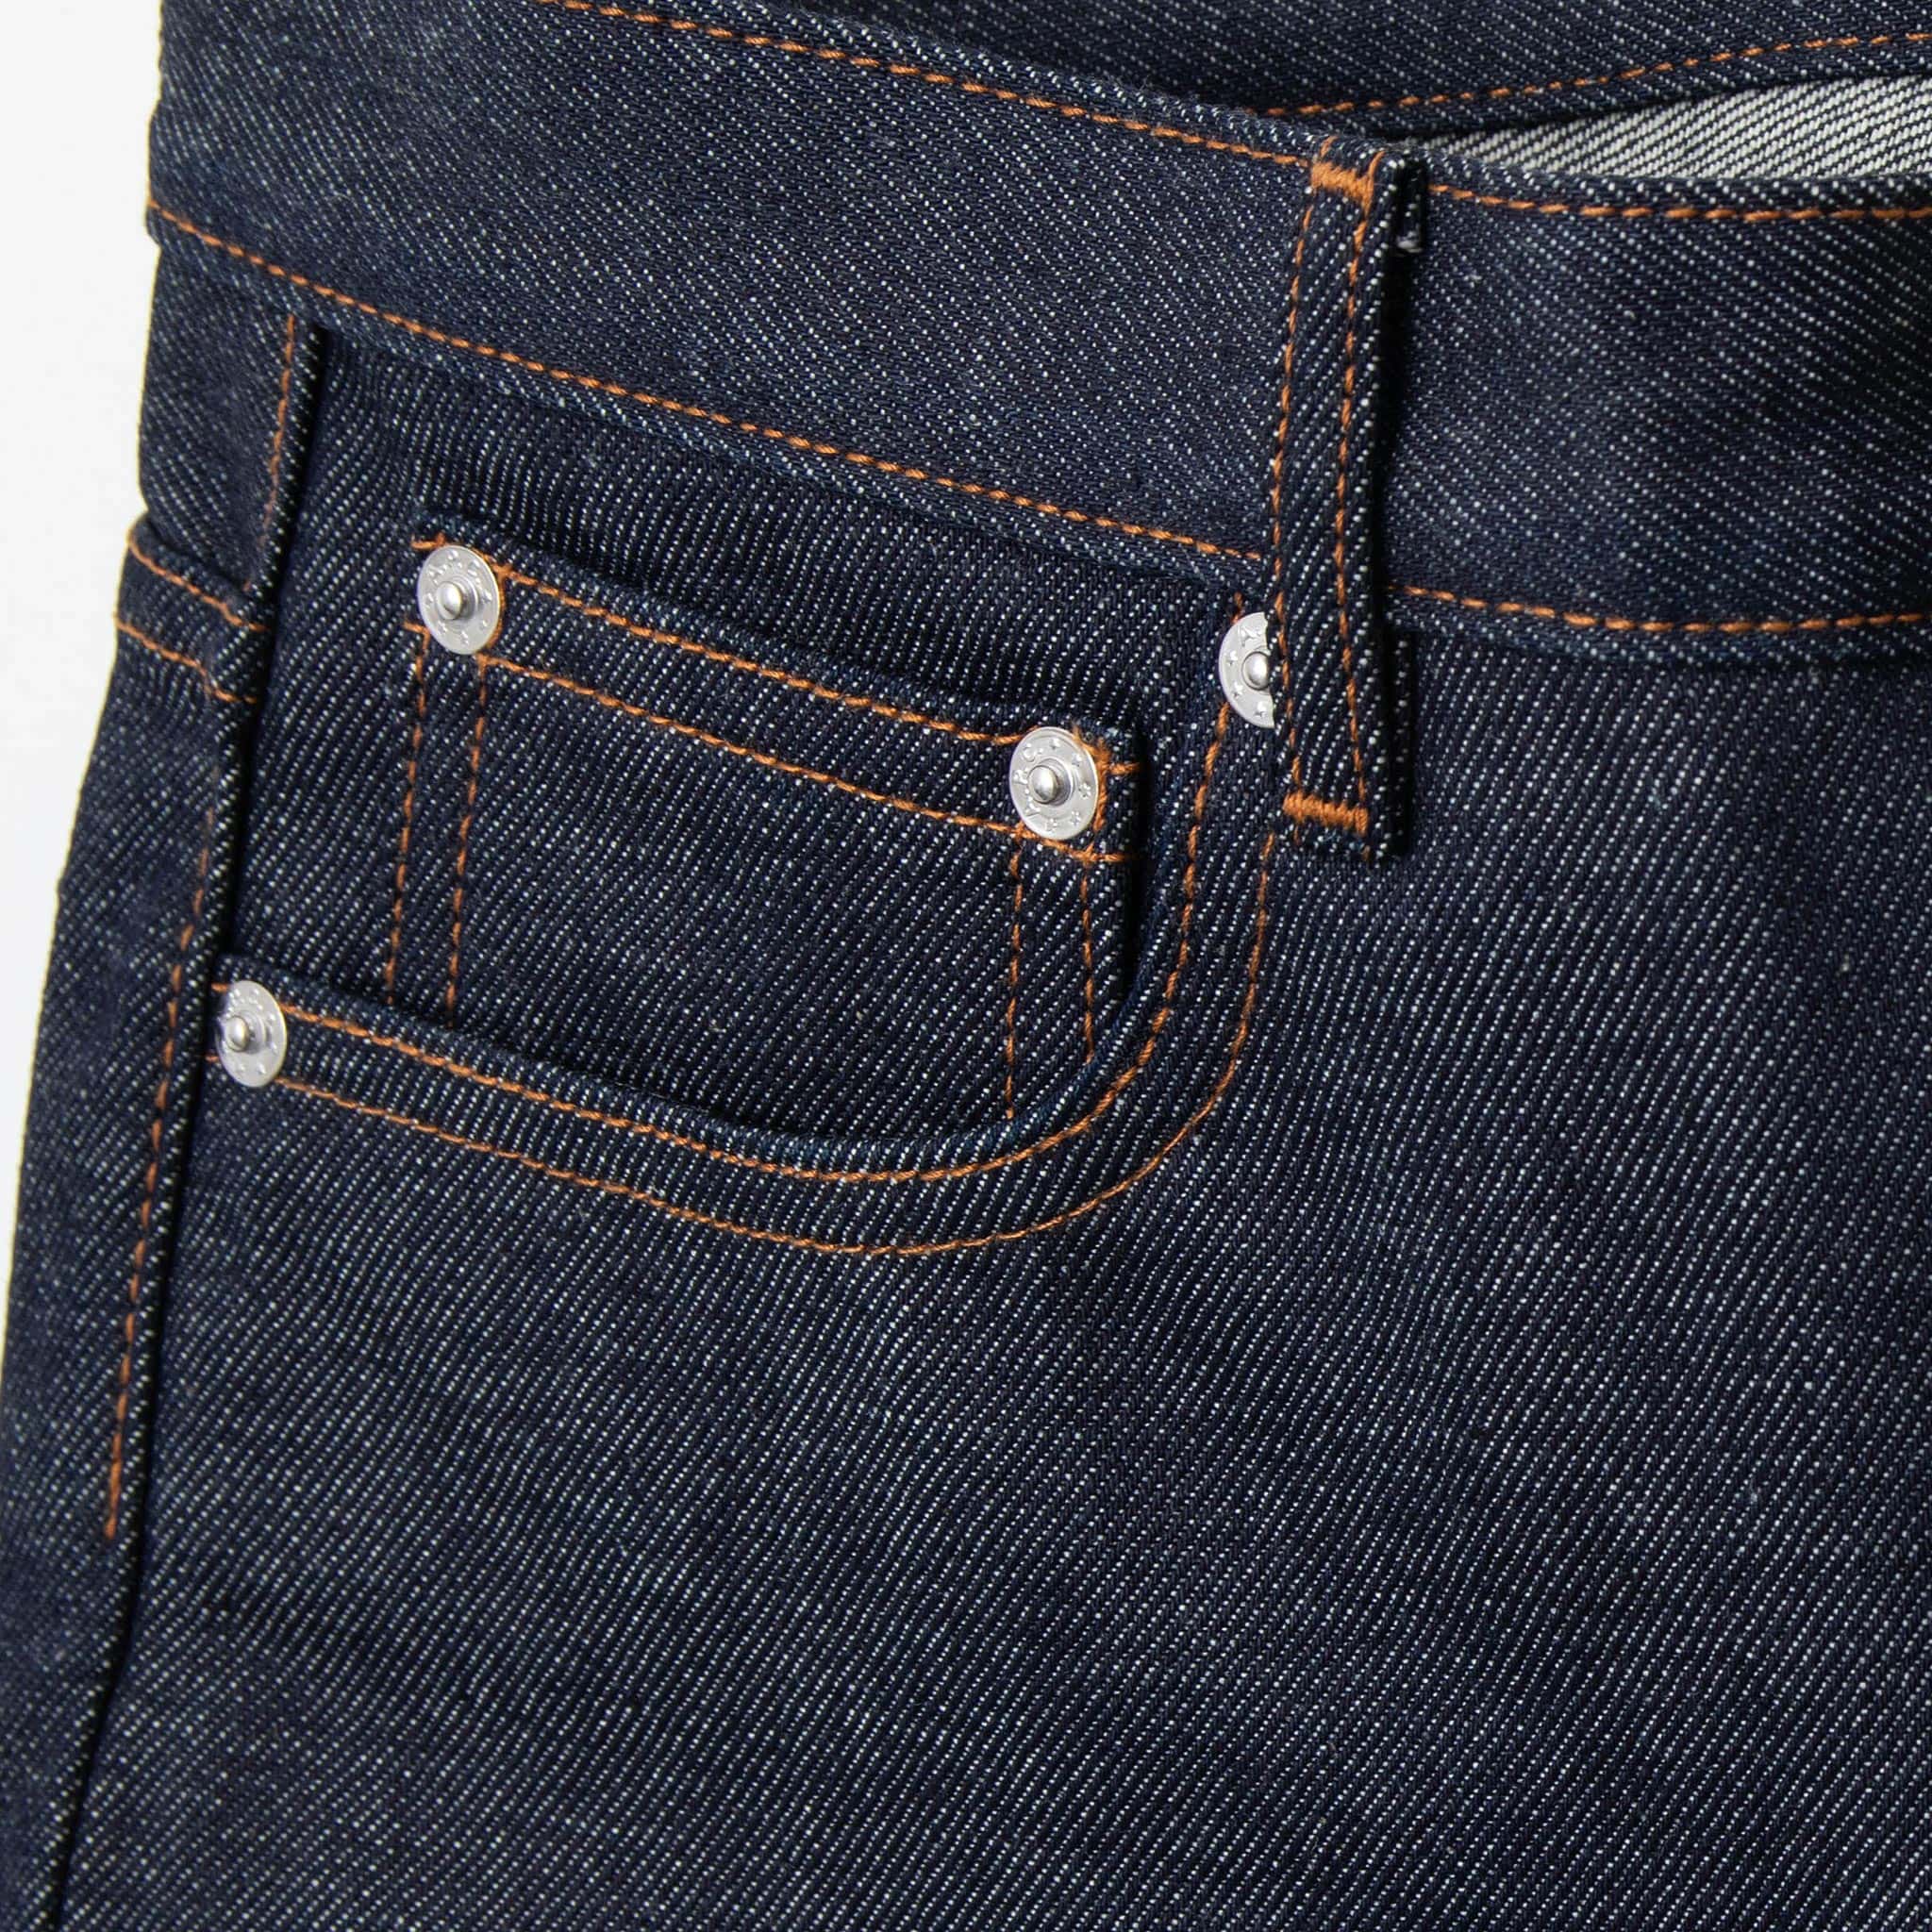 A.P.C. - PETIT STANDARD - LOW RISE STRAIGHT JEANS - CODBS M09002 ...